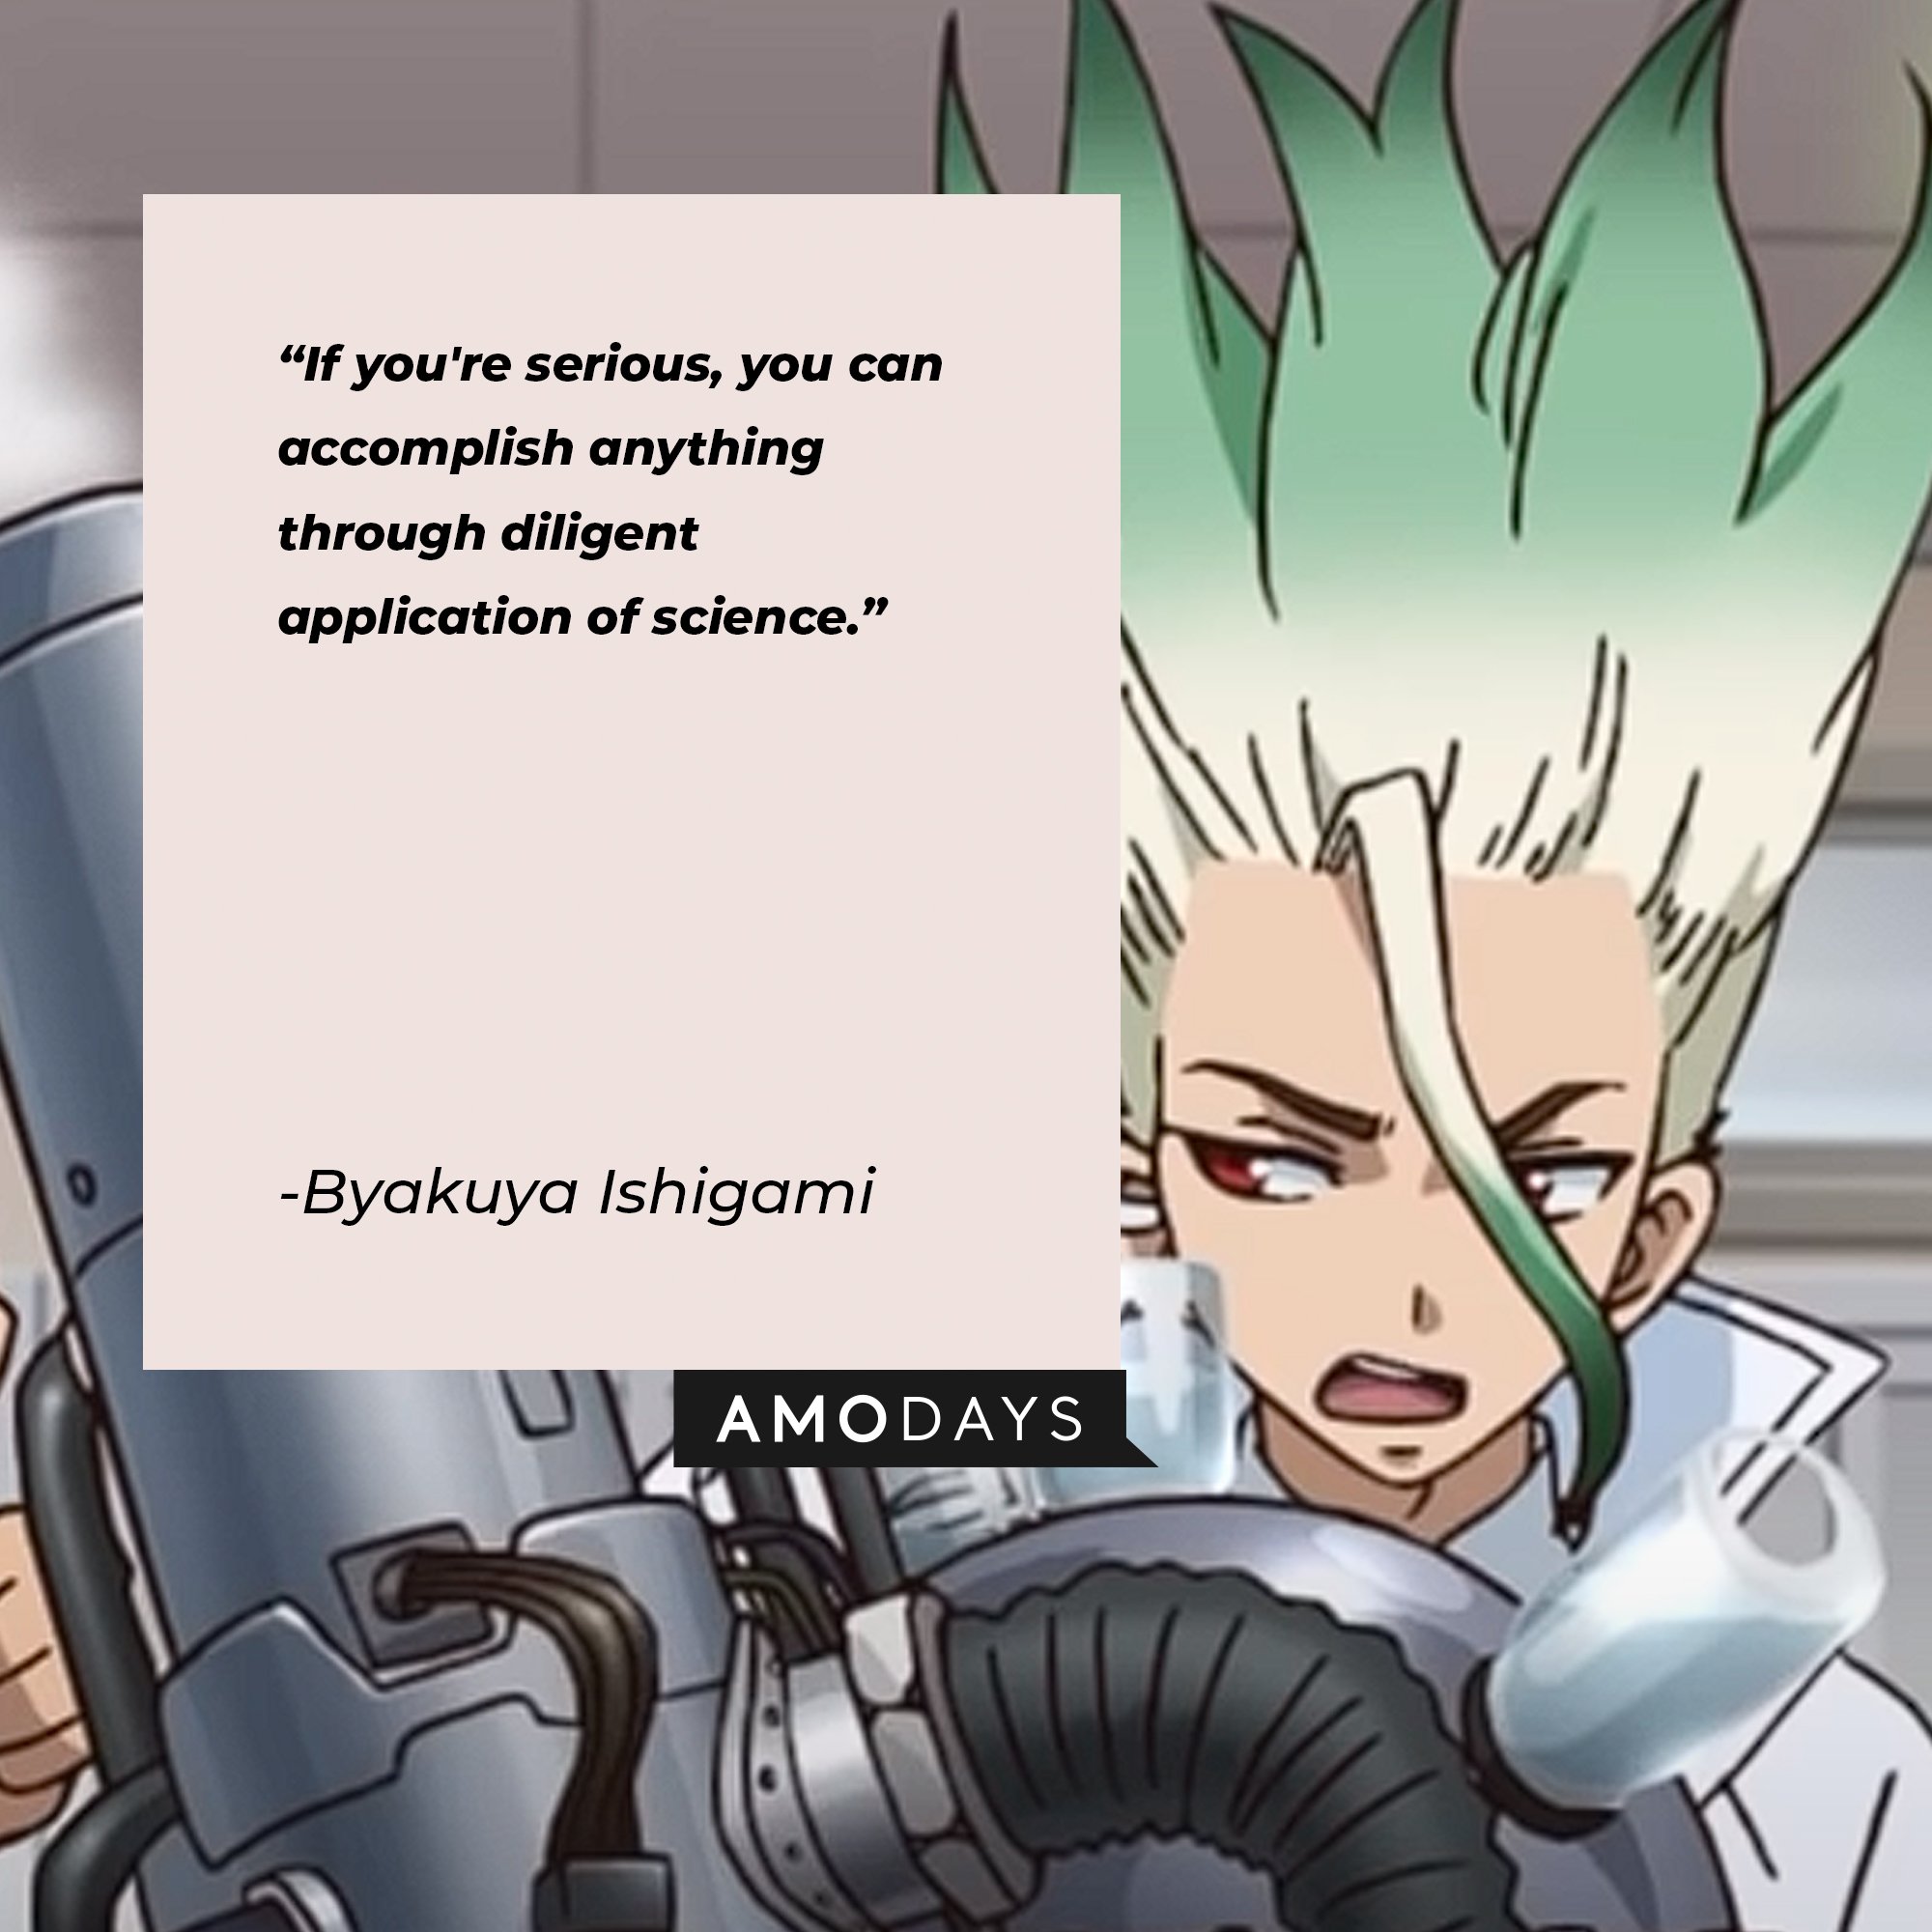 Byakuya Ishigami’s quote: "If you're serious, you can accomplish anything through diligent application of science." | Image: AmoDays